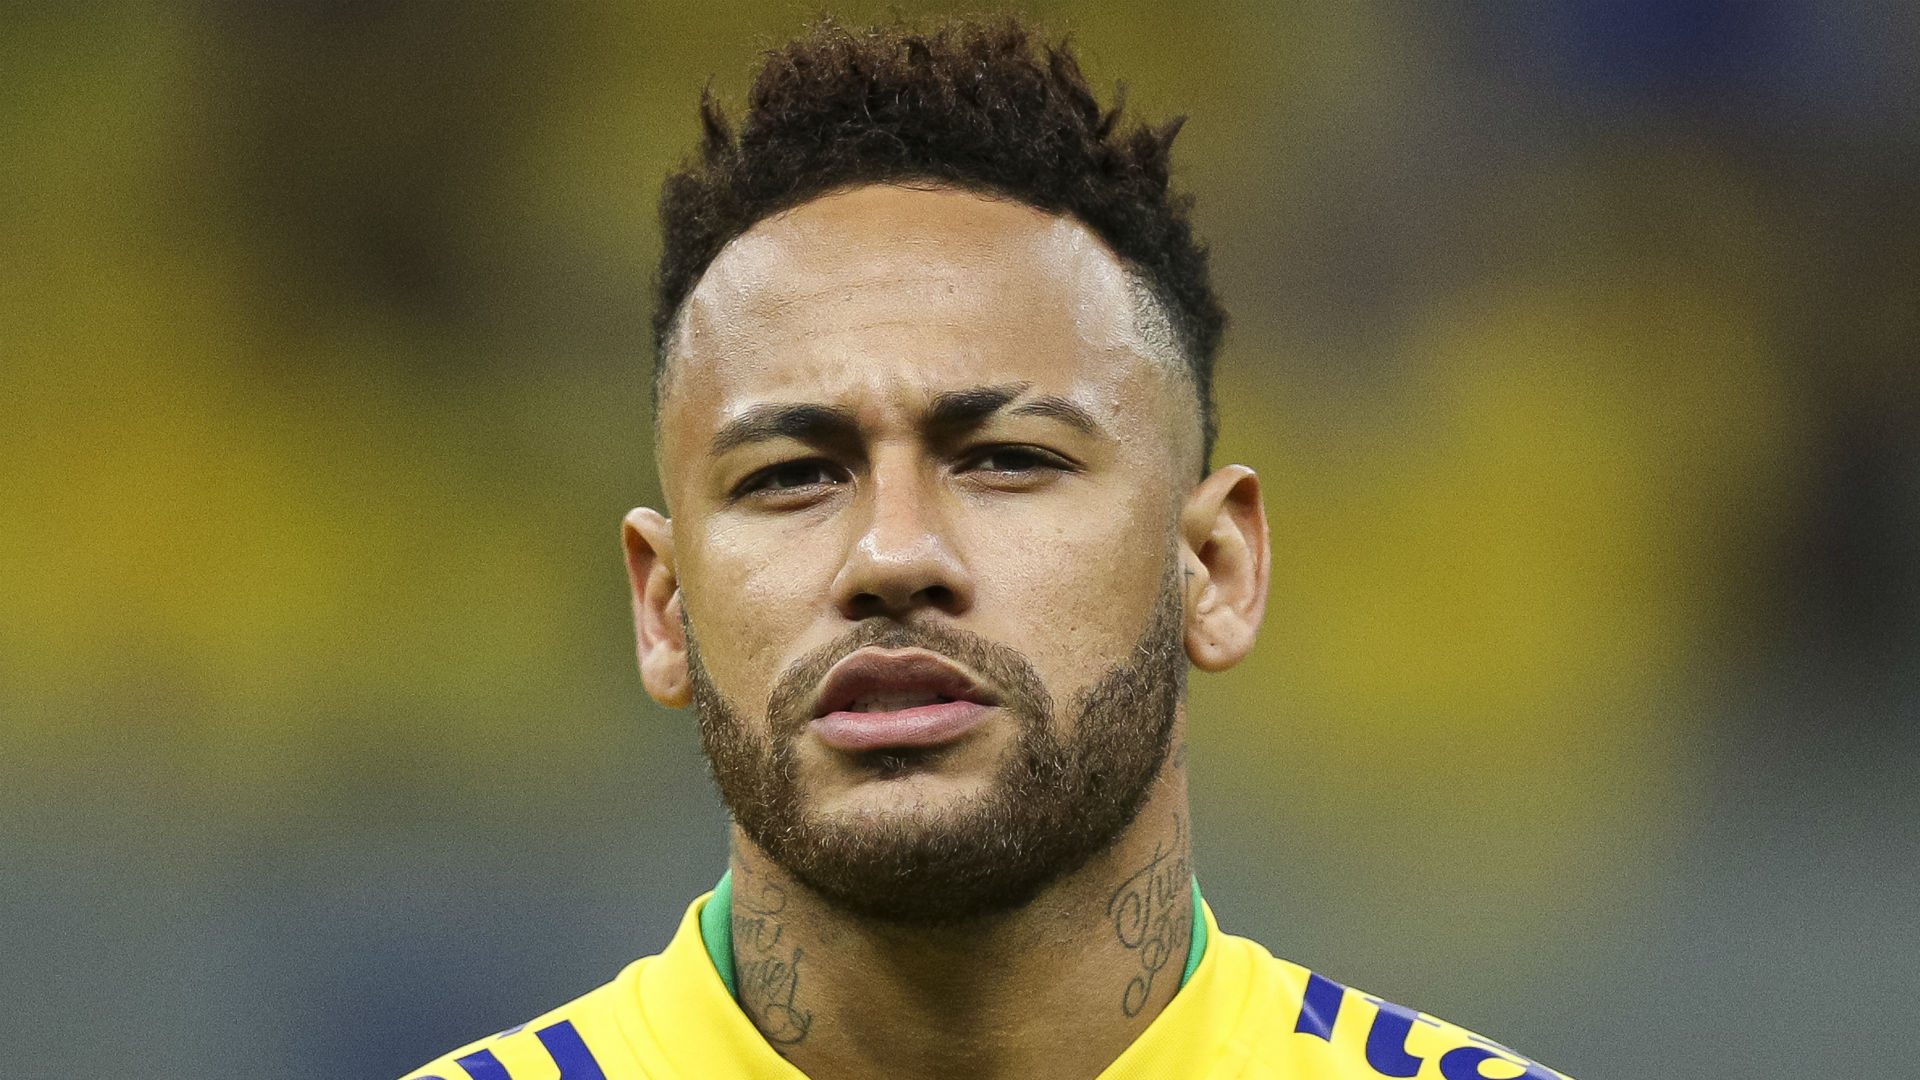 'I'm no superhero or perfect role model' - Neymar admits having 'bad moments' amid tension with PSG